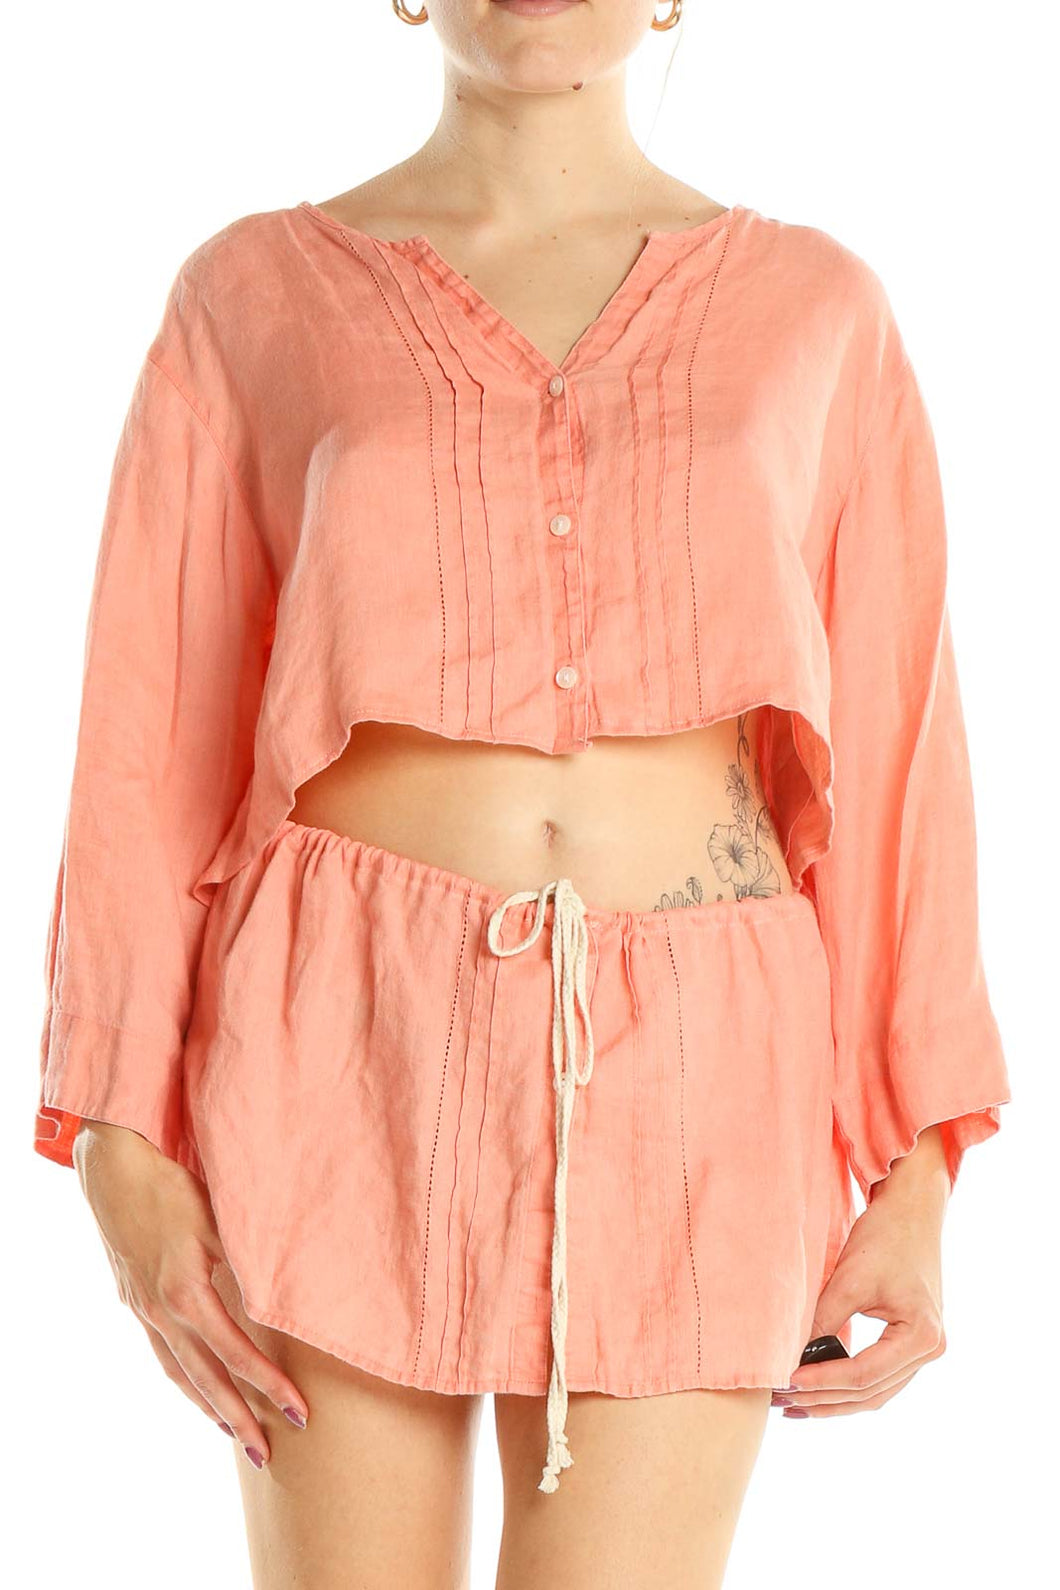 Apres x SilkRoll Reworked: Palm Beach top - 100% linen cropped button down M